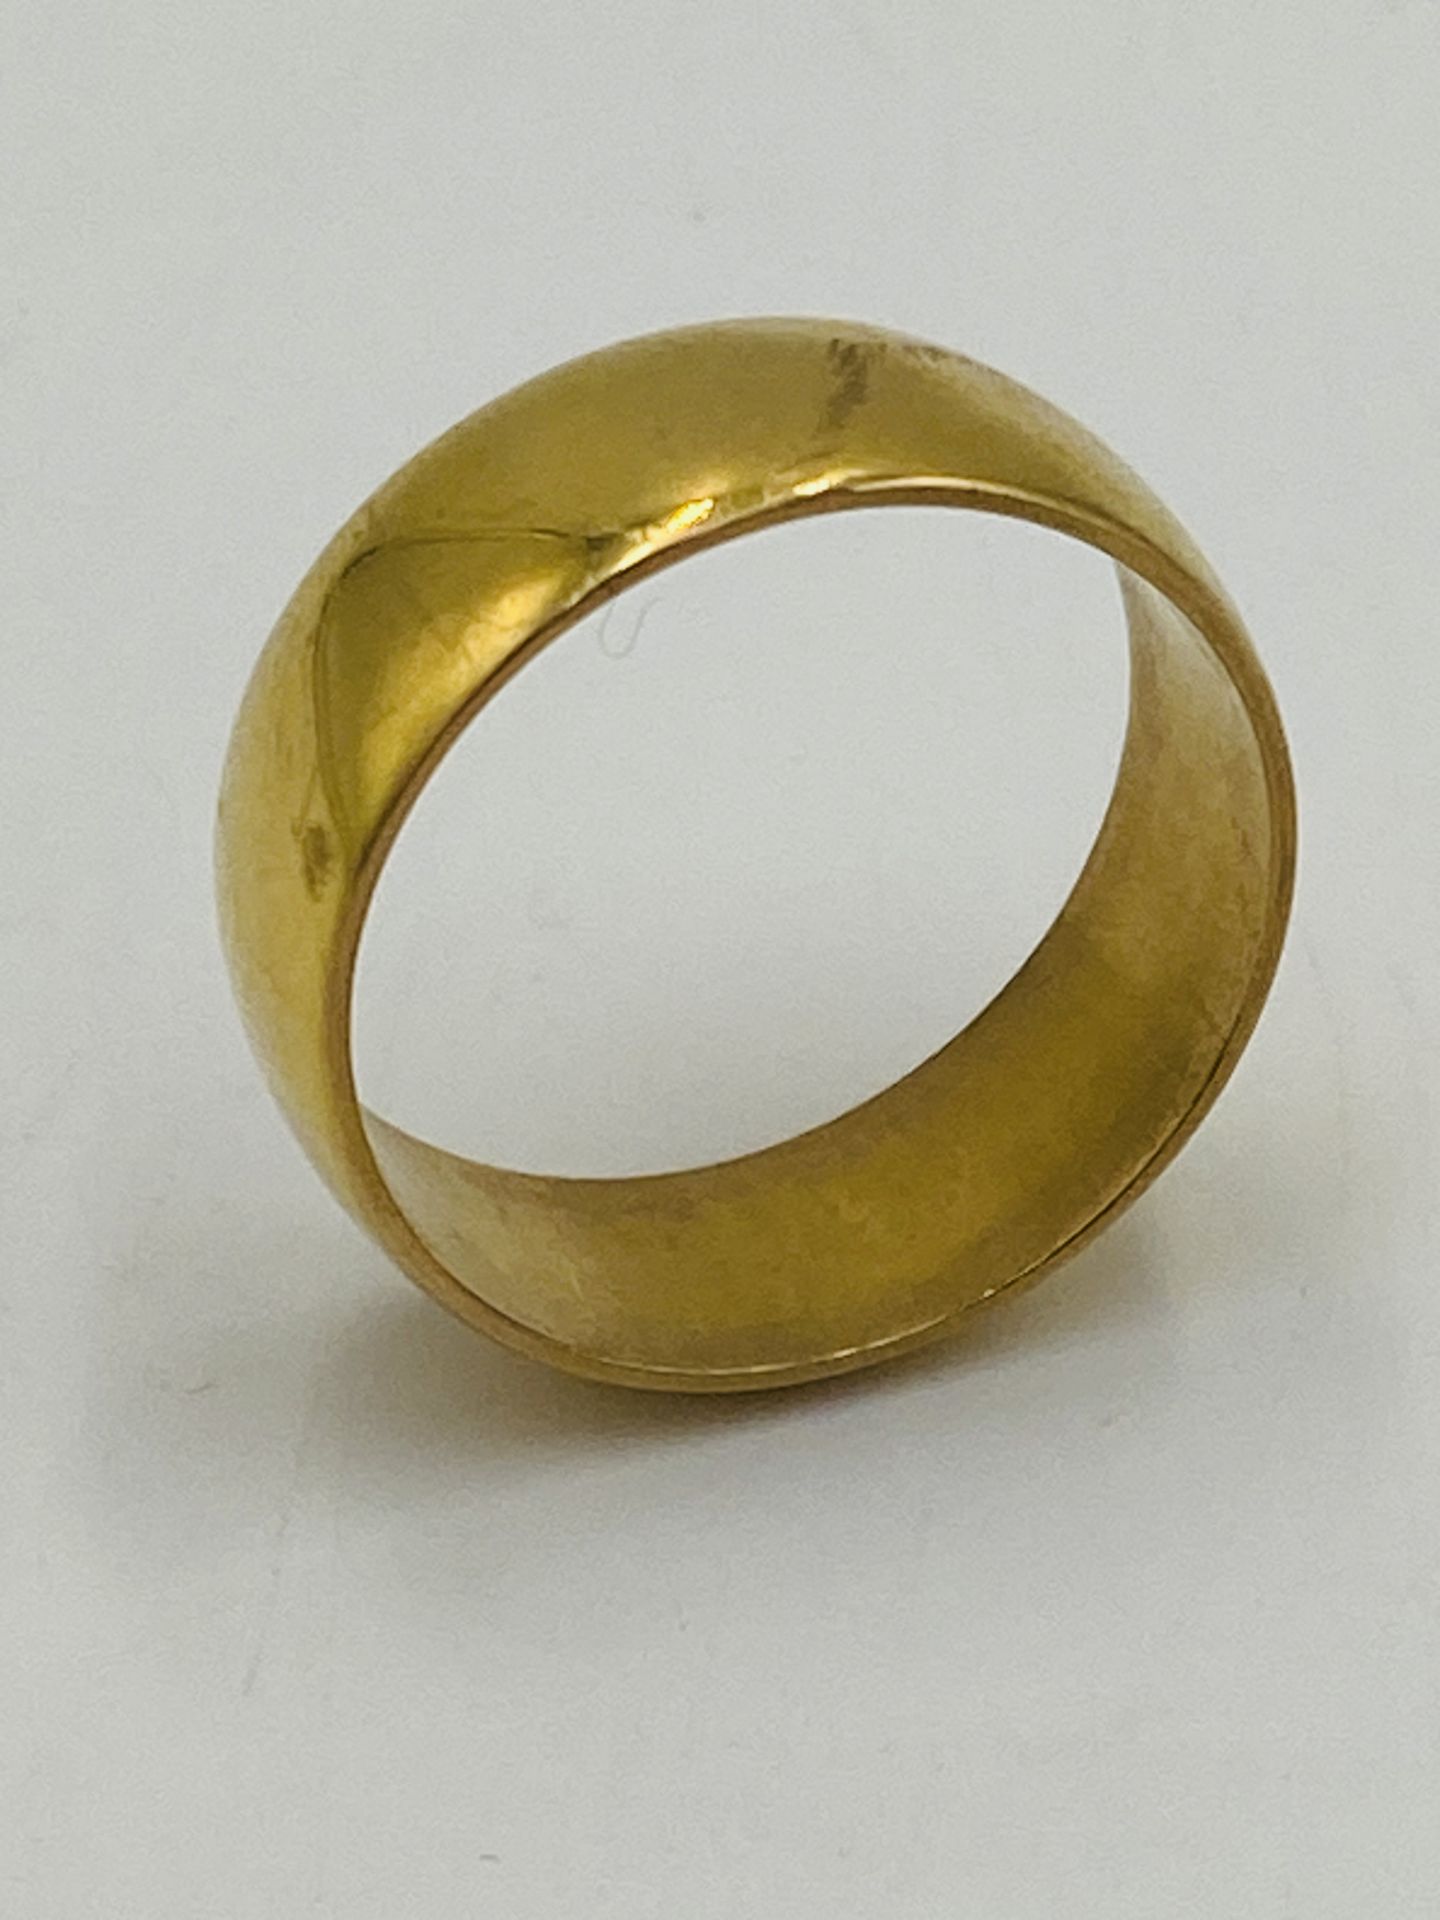 9ct gold band - Image 3 of 5